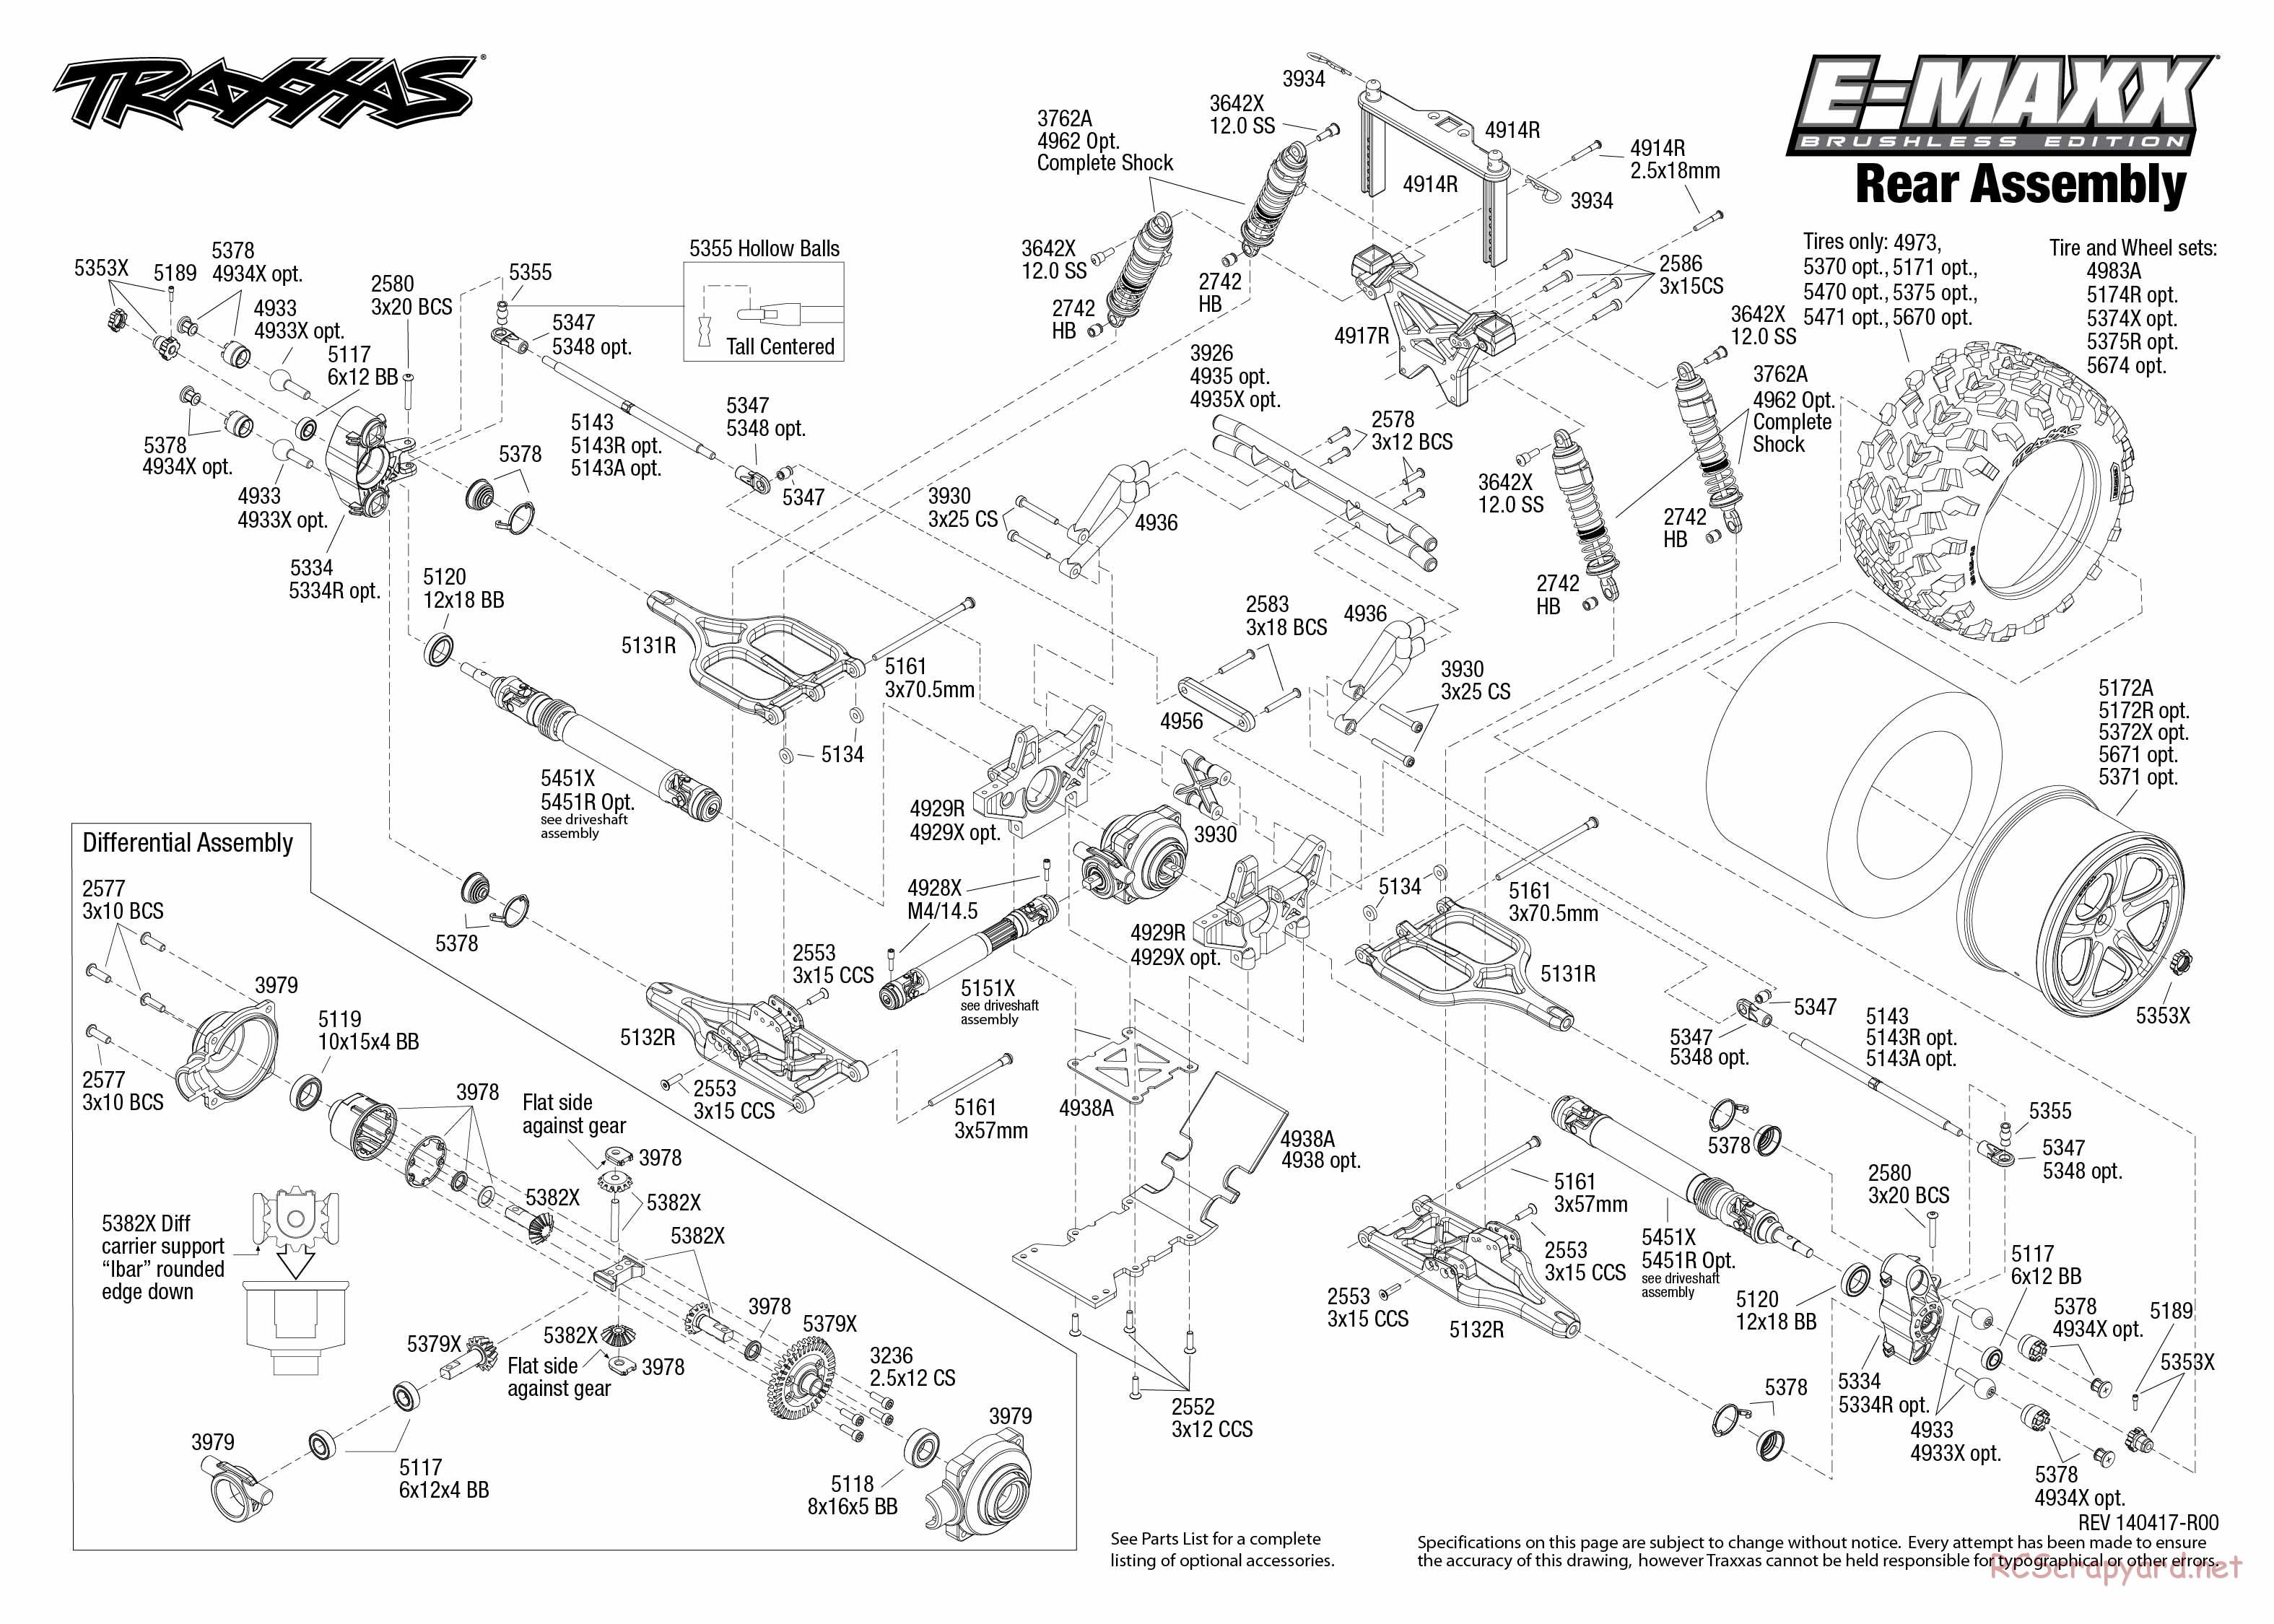 Traxxas - E-Maxx Brushless (2014) - Exploded Views - Page 4